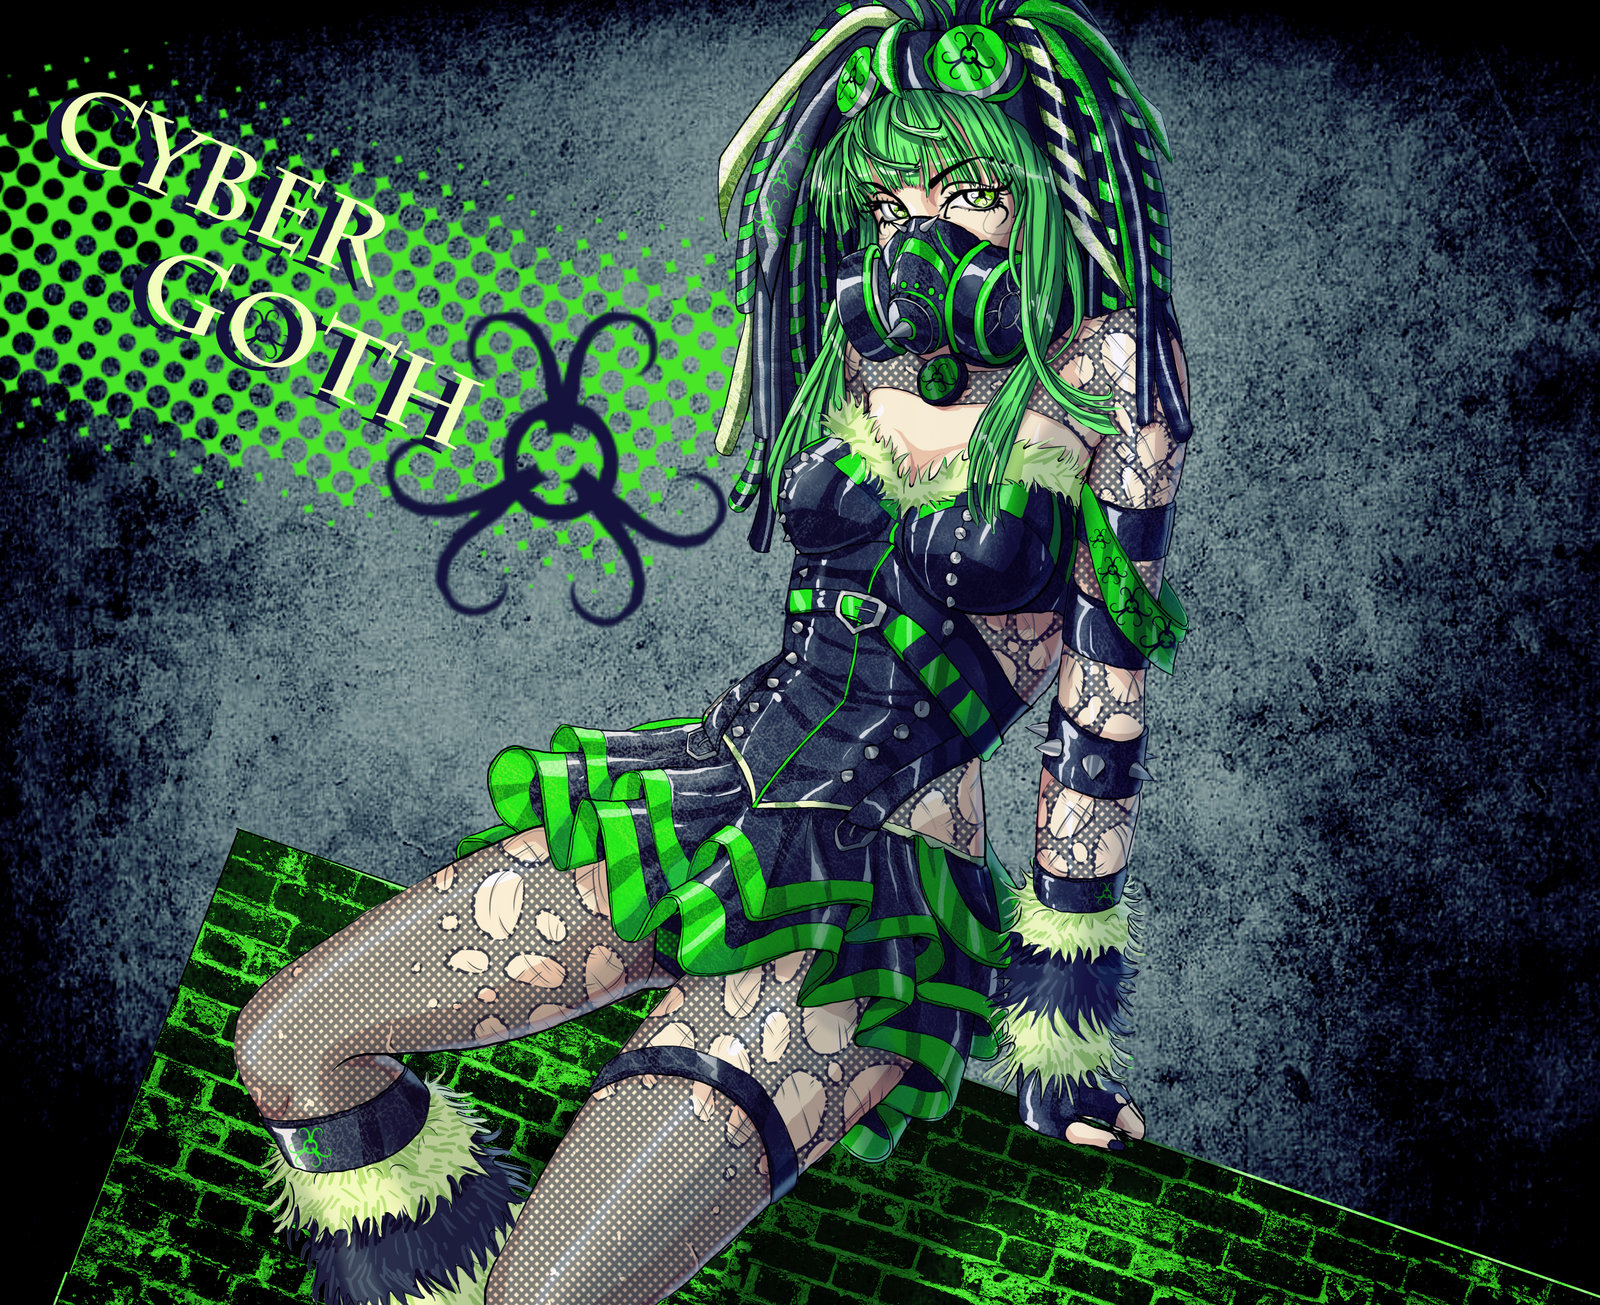 Gothic cyber How to